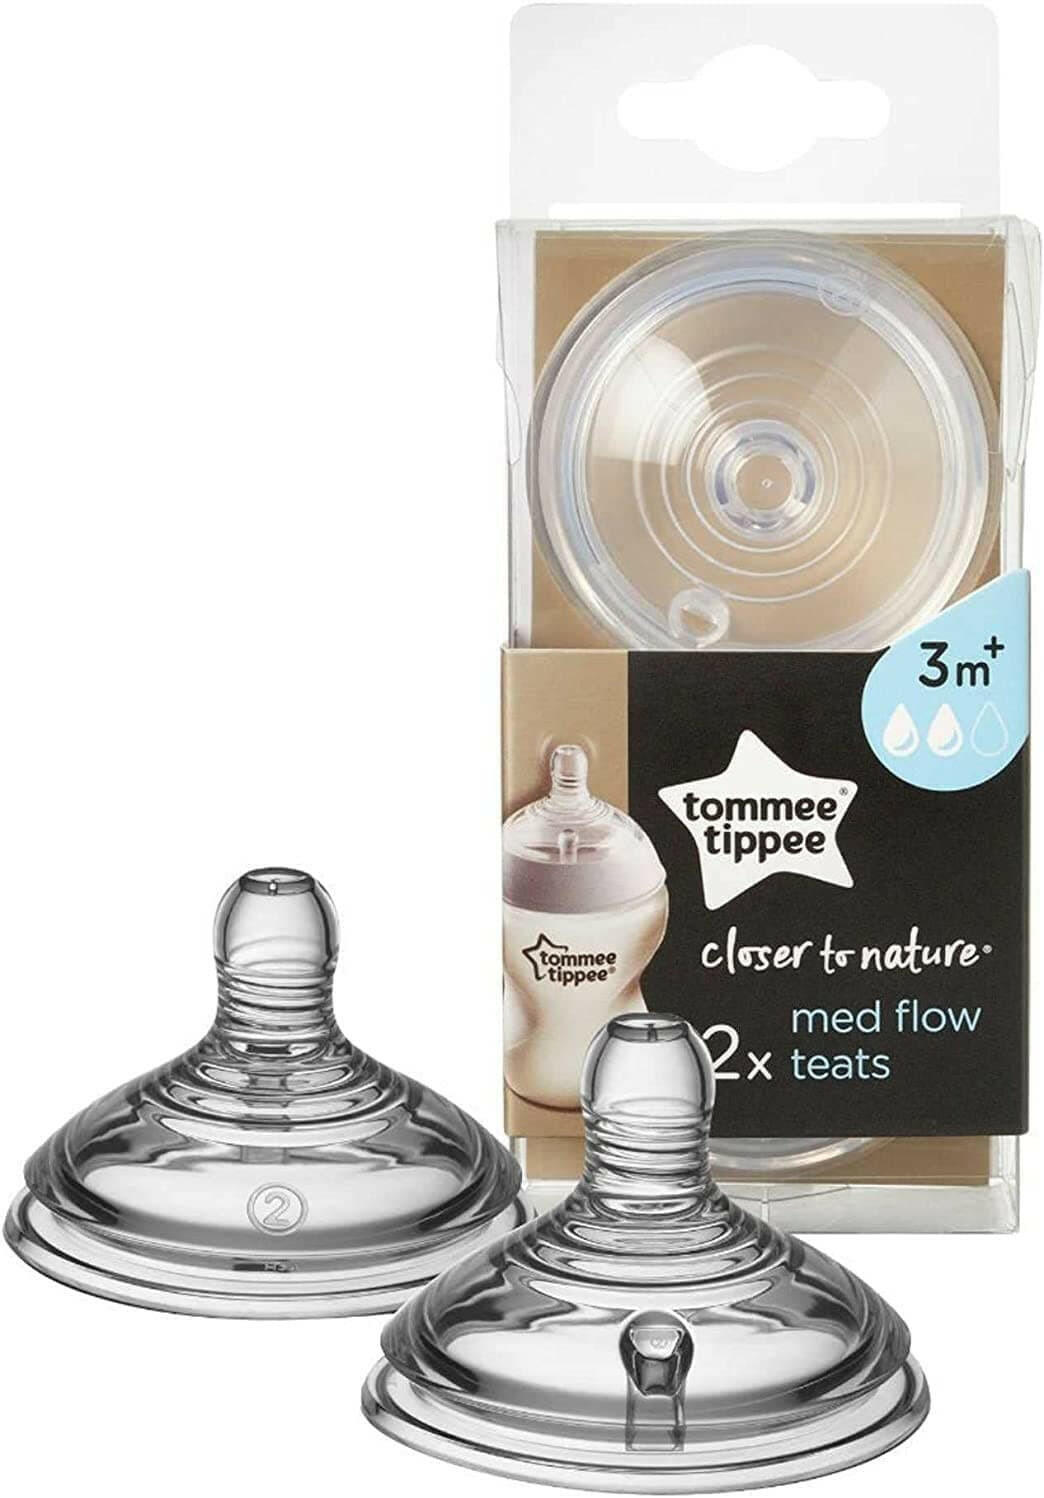 Tommee Tippee Closer to Nature Advanced Anti-Colic - 2 Medium Flow Teats (3 Months +).